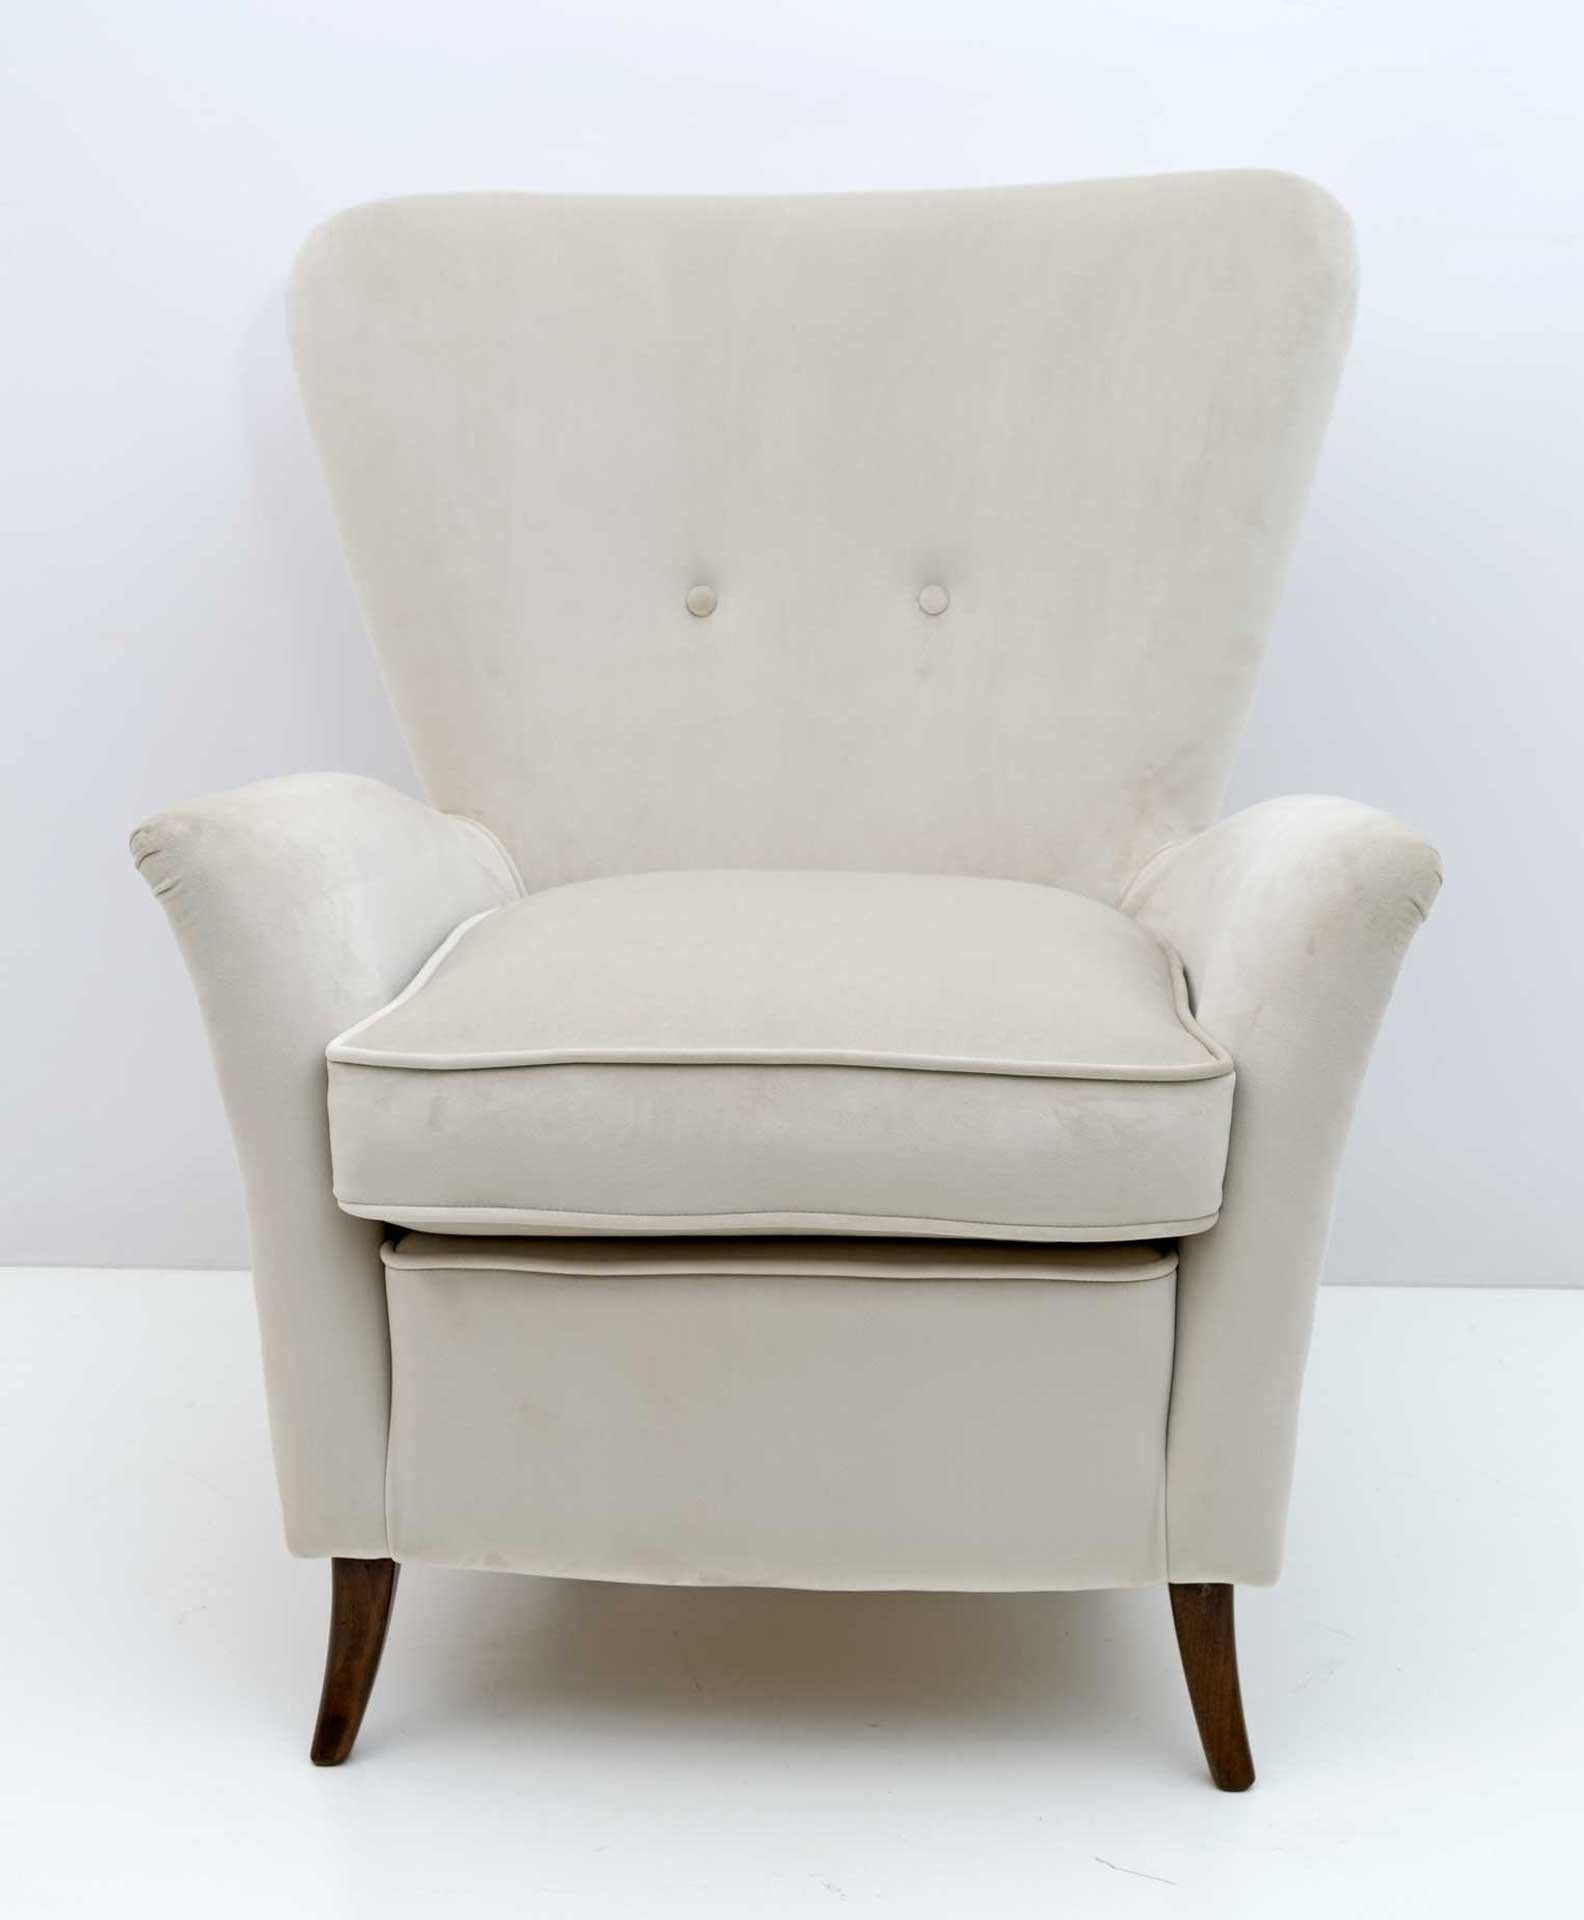 Luxurious Art Deco style armchair designed by Gio Ponti for Hotel Bristol Merano Italy.
Lounge chair with low armrests with a sculptural shape.
Made in Italy in the early 1950s
Completely restored and reupholstered.